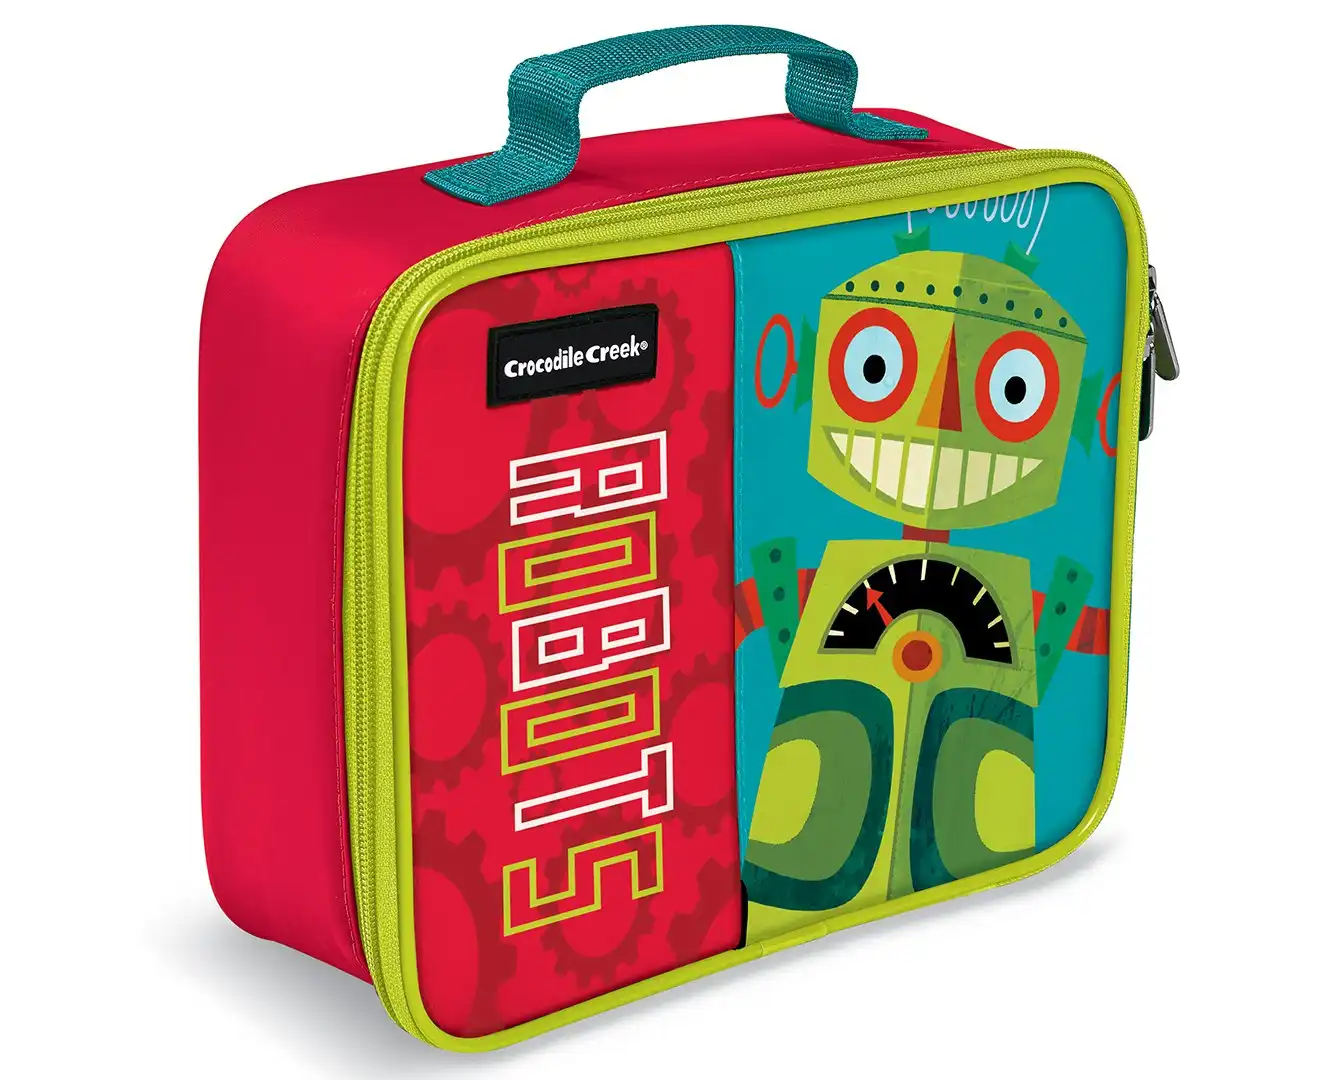 Crocodile Creek Robot Lunchbox/Carry Lunch Bag/Storage for Kids/Children Red/GRN